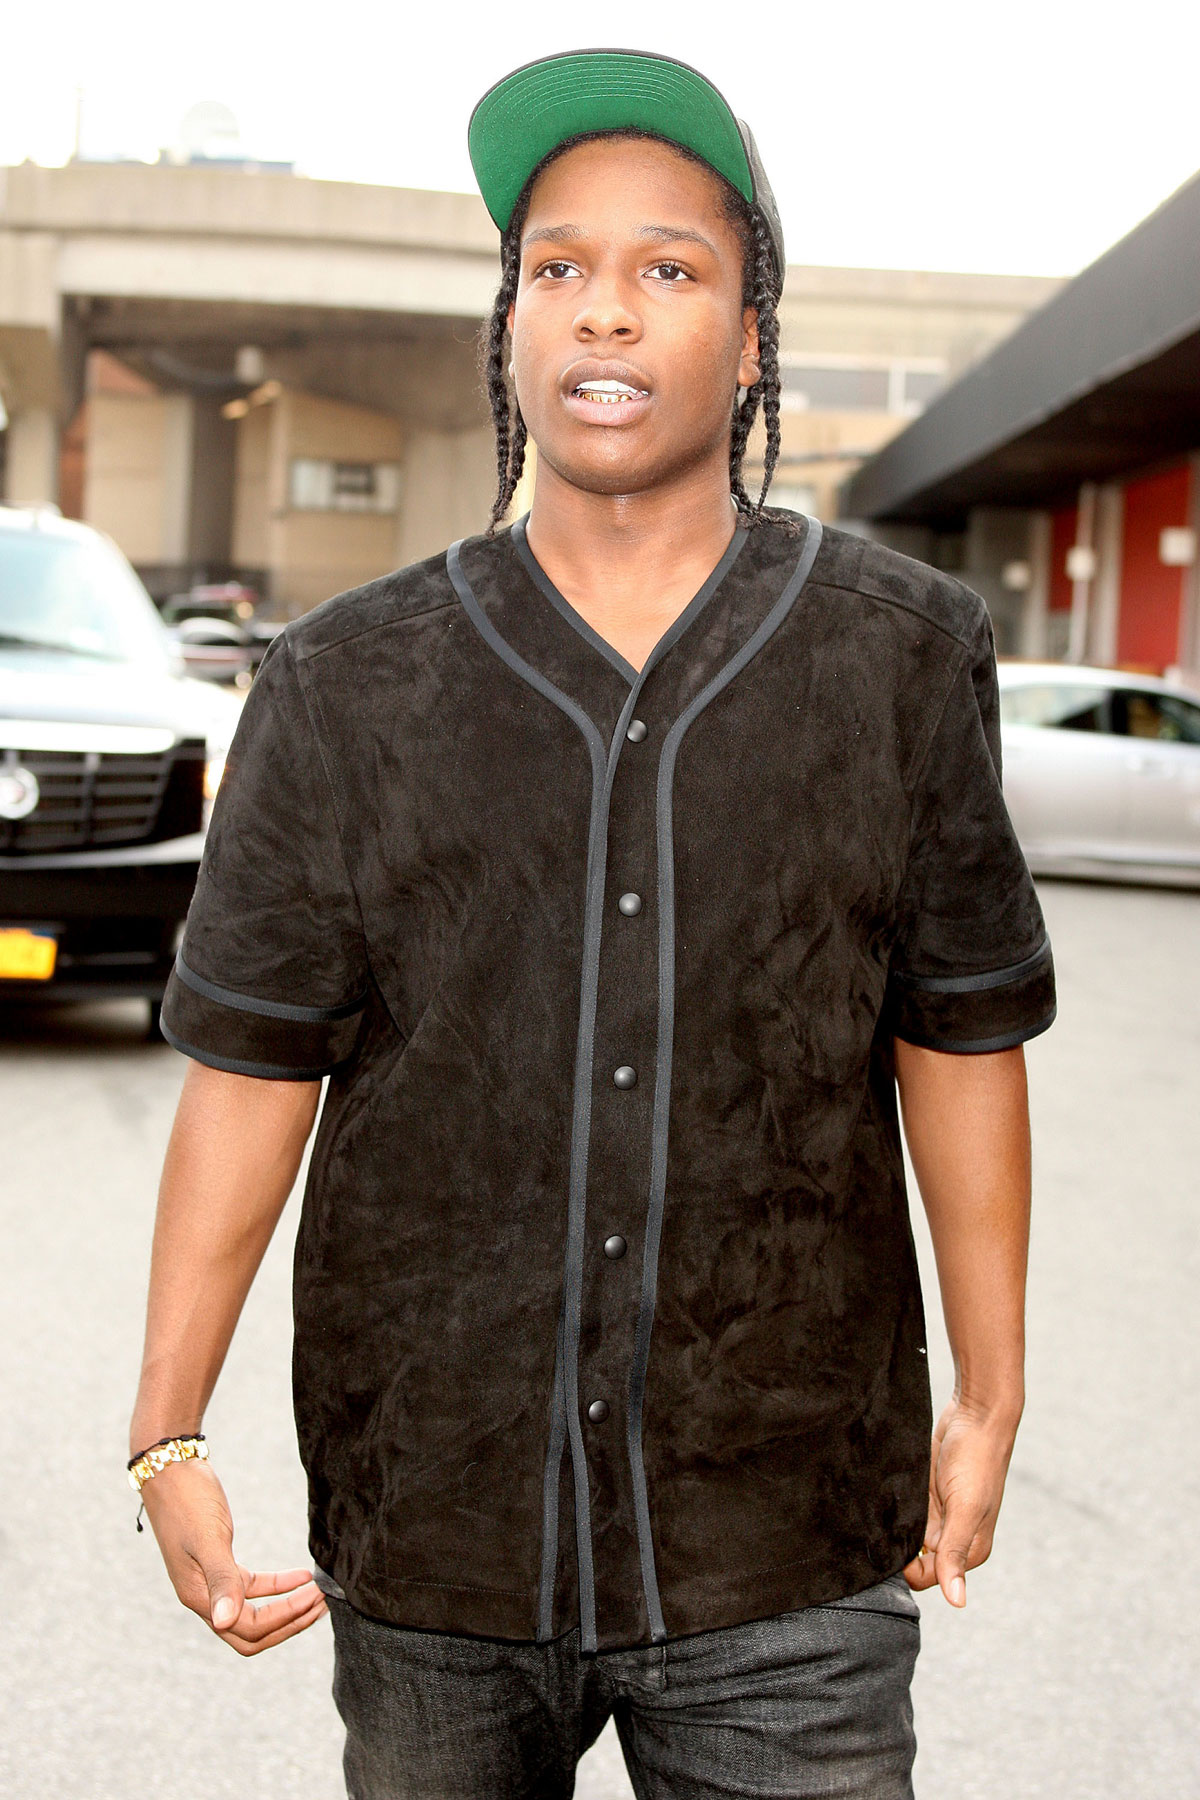 A$AP Rocky's Alleged Victim Says He Feared For His Life! - Perez Hilton